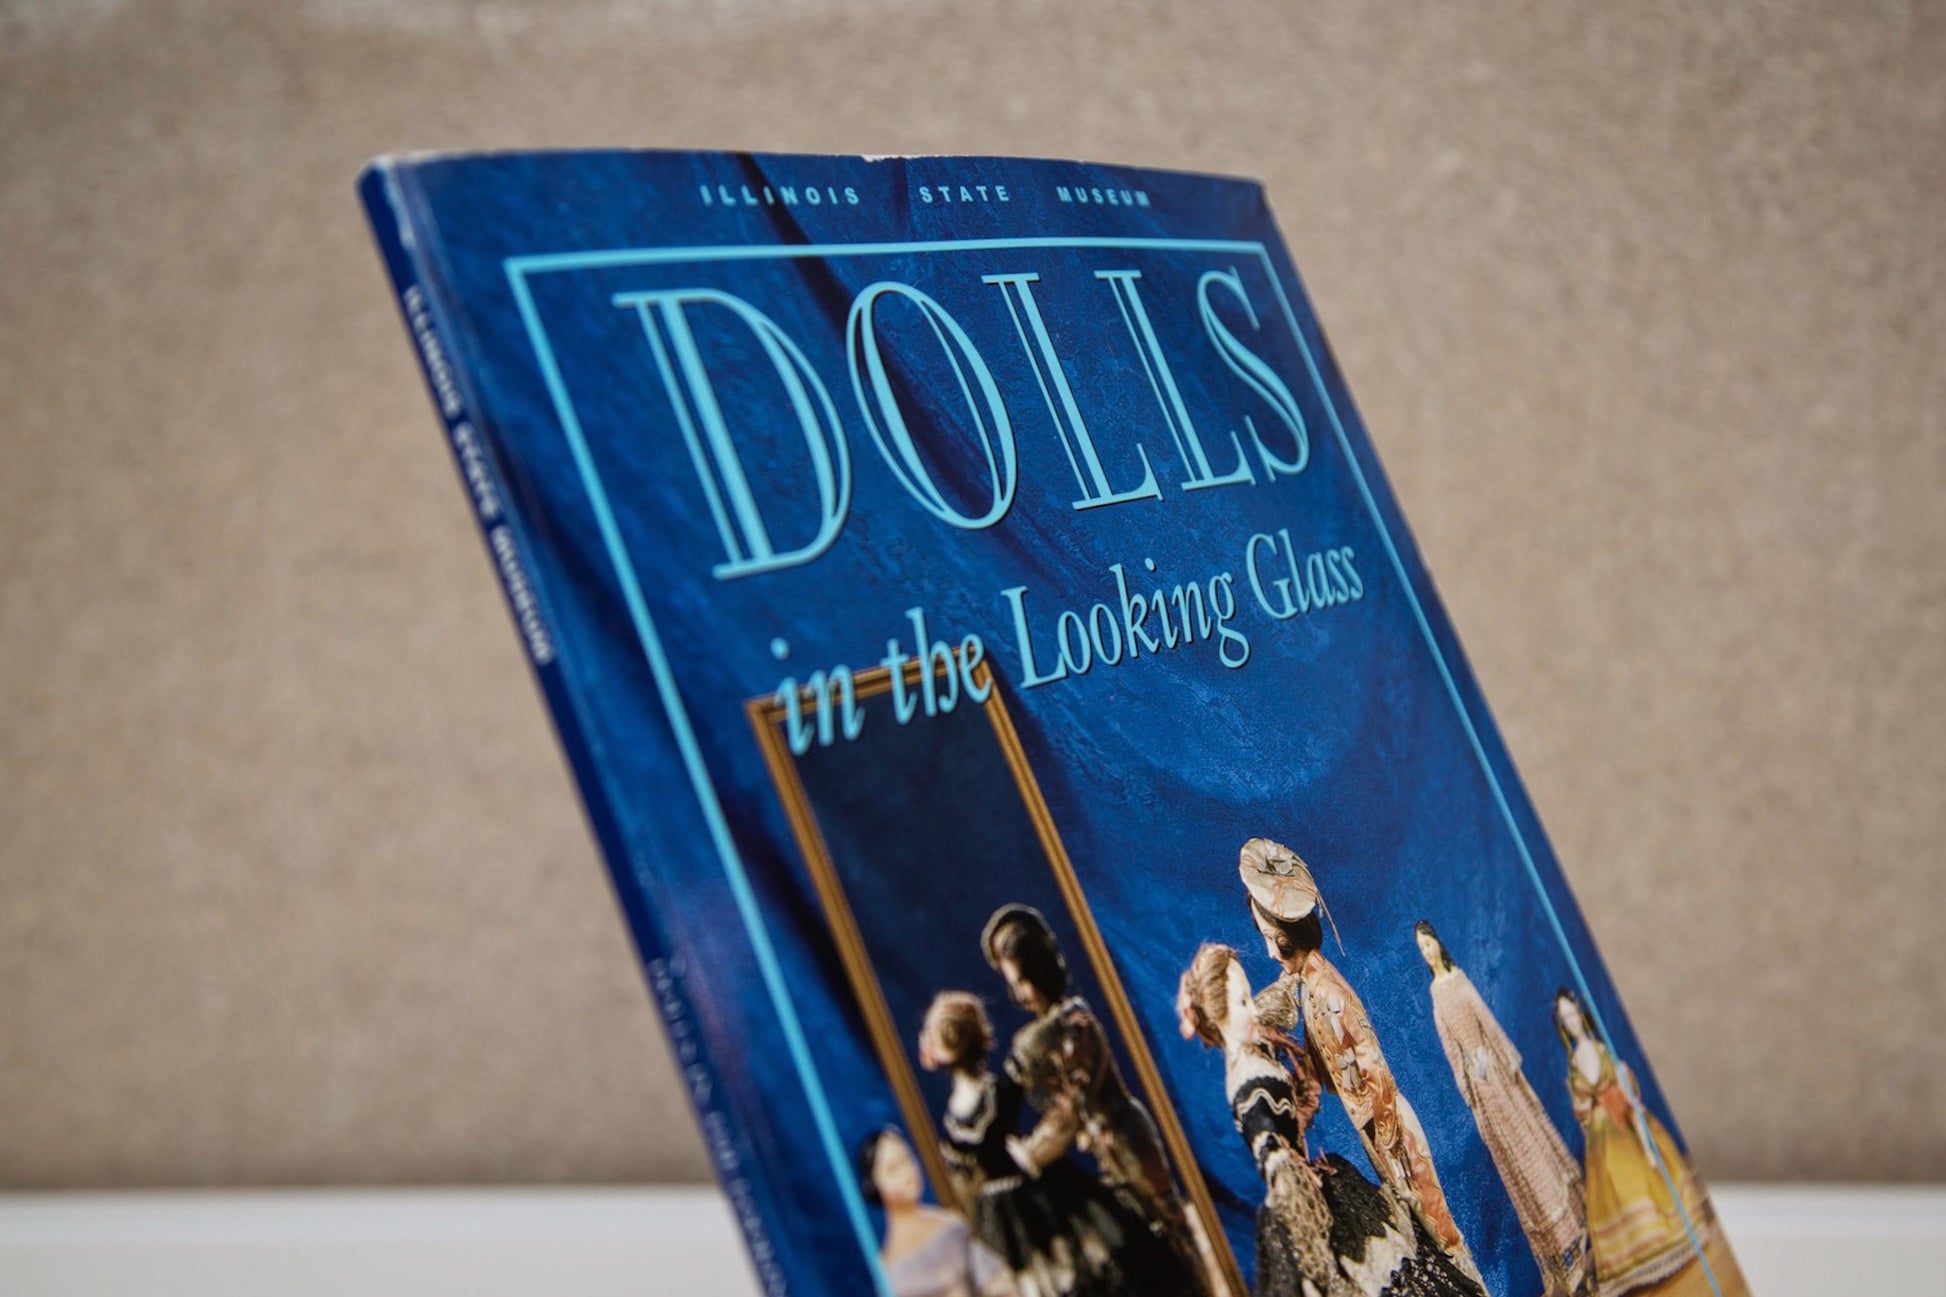 Close up image of the top of the front cover of the book “Dolls in the Looking Glass: The Joy E. Orozco Collection”.